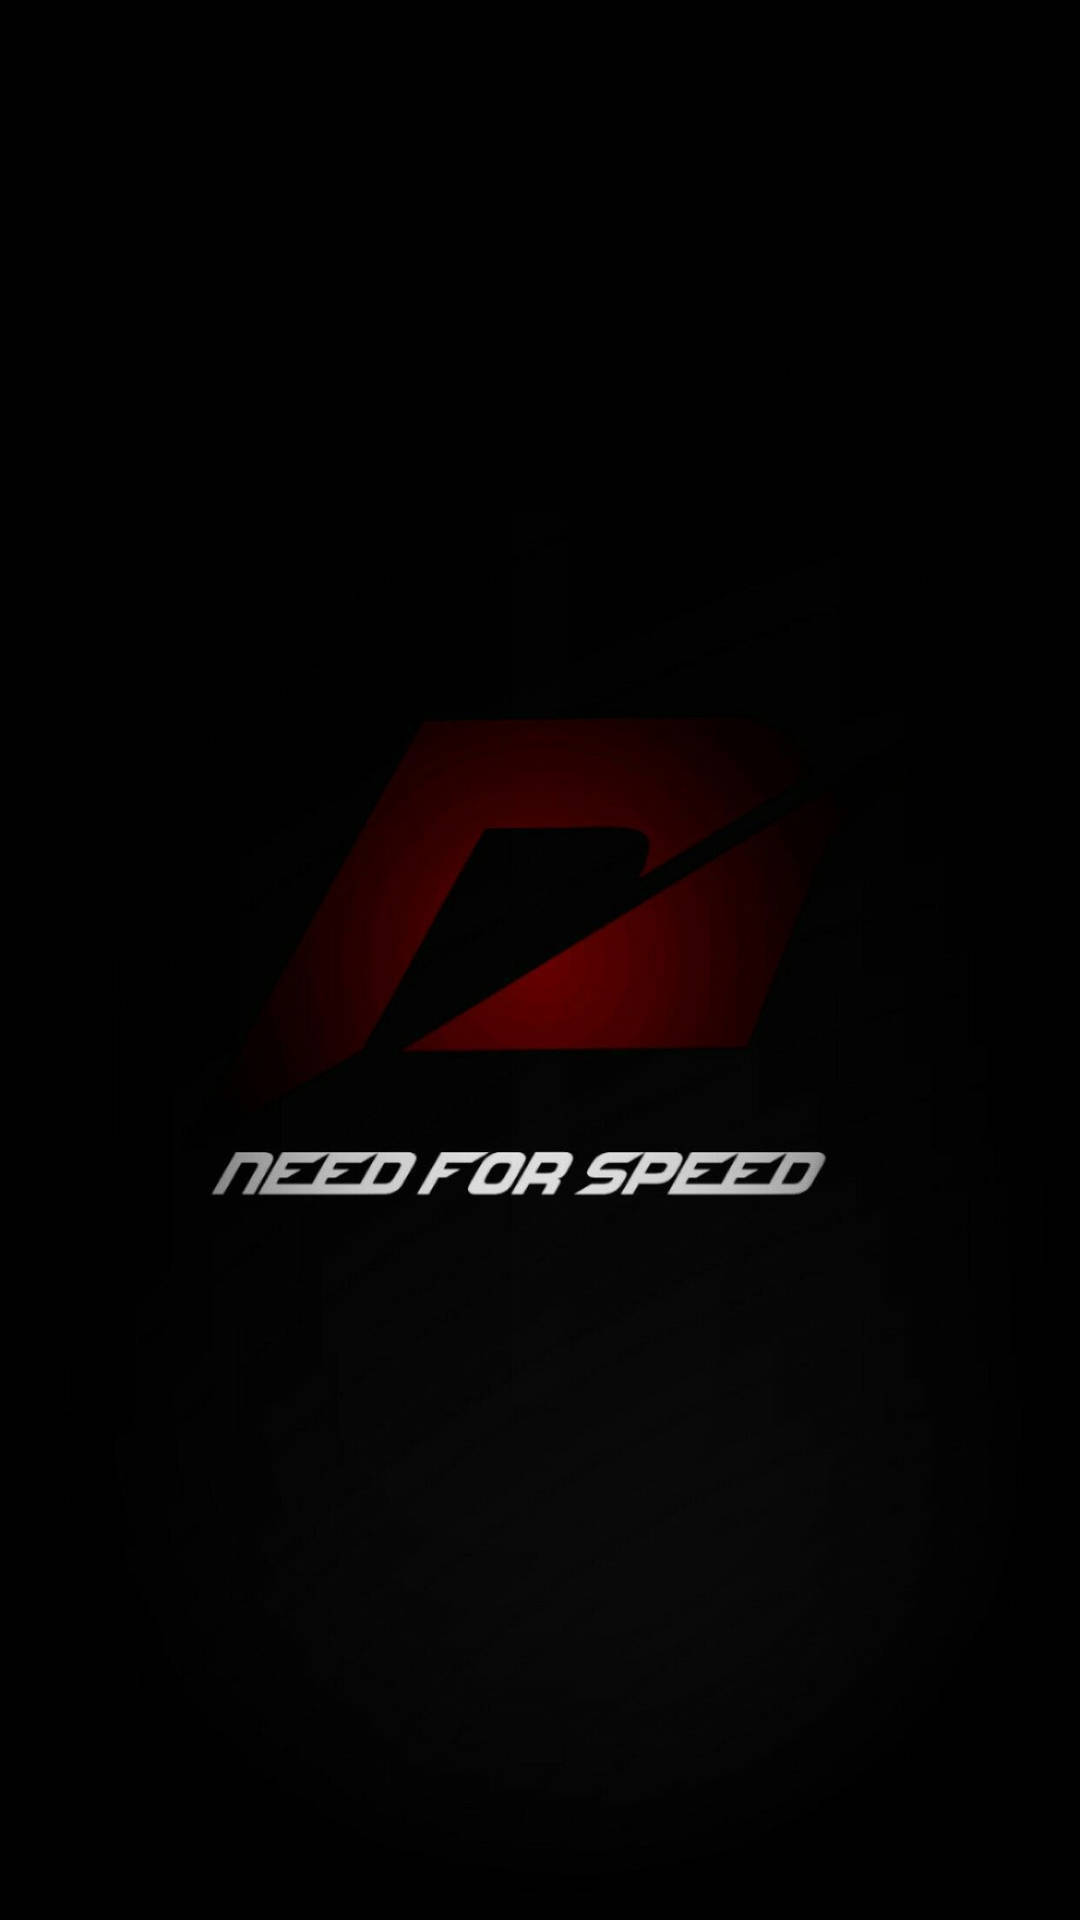 Need For Speed Game Logo Black Aesthetic Iphone